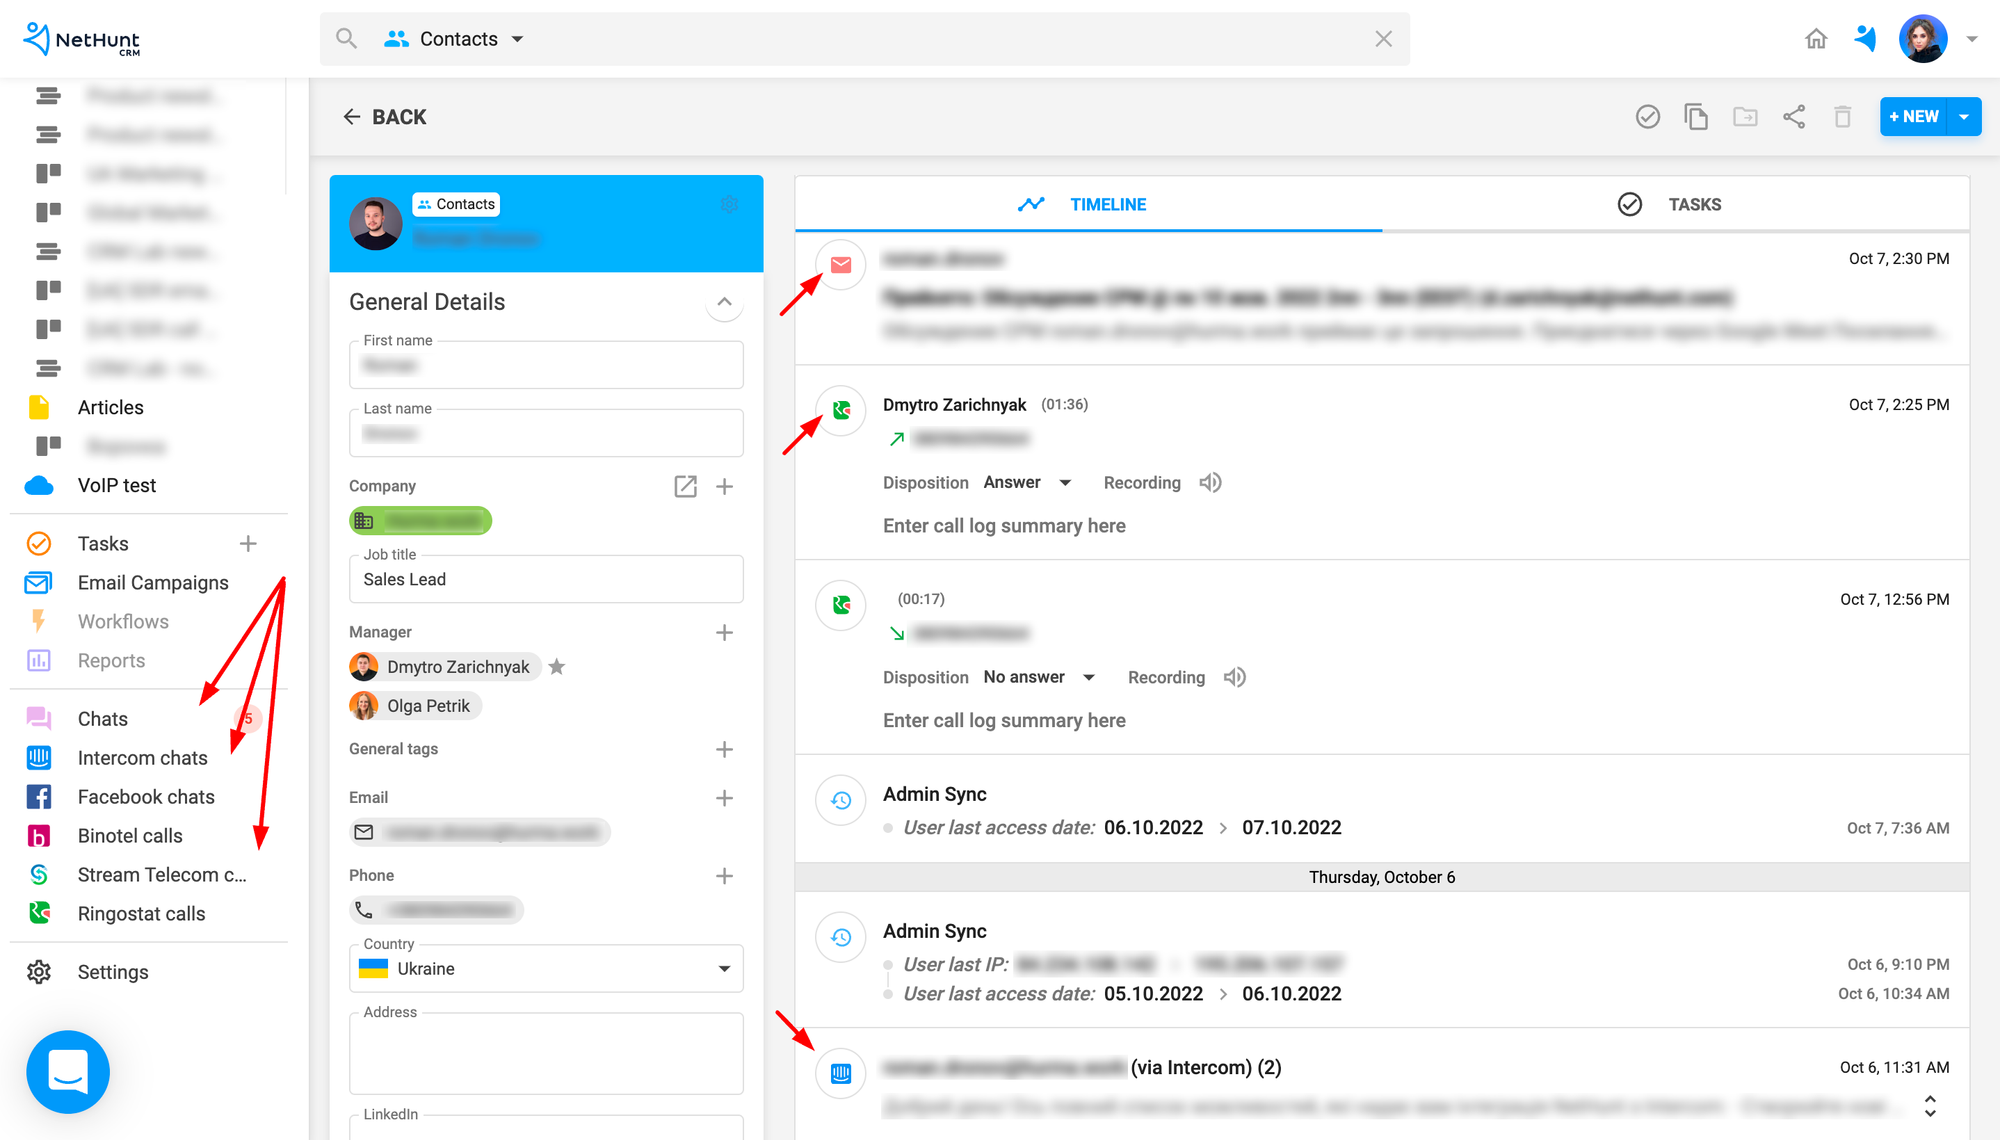 Communication via different channels in NetHunt CRM